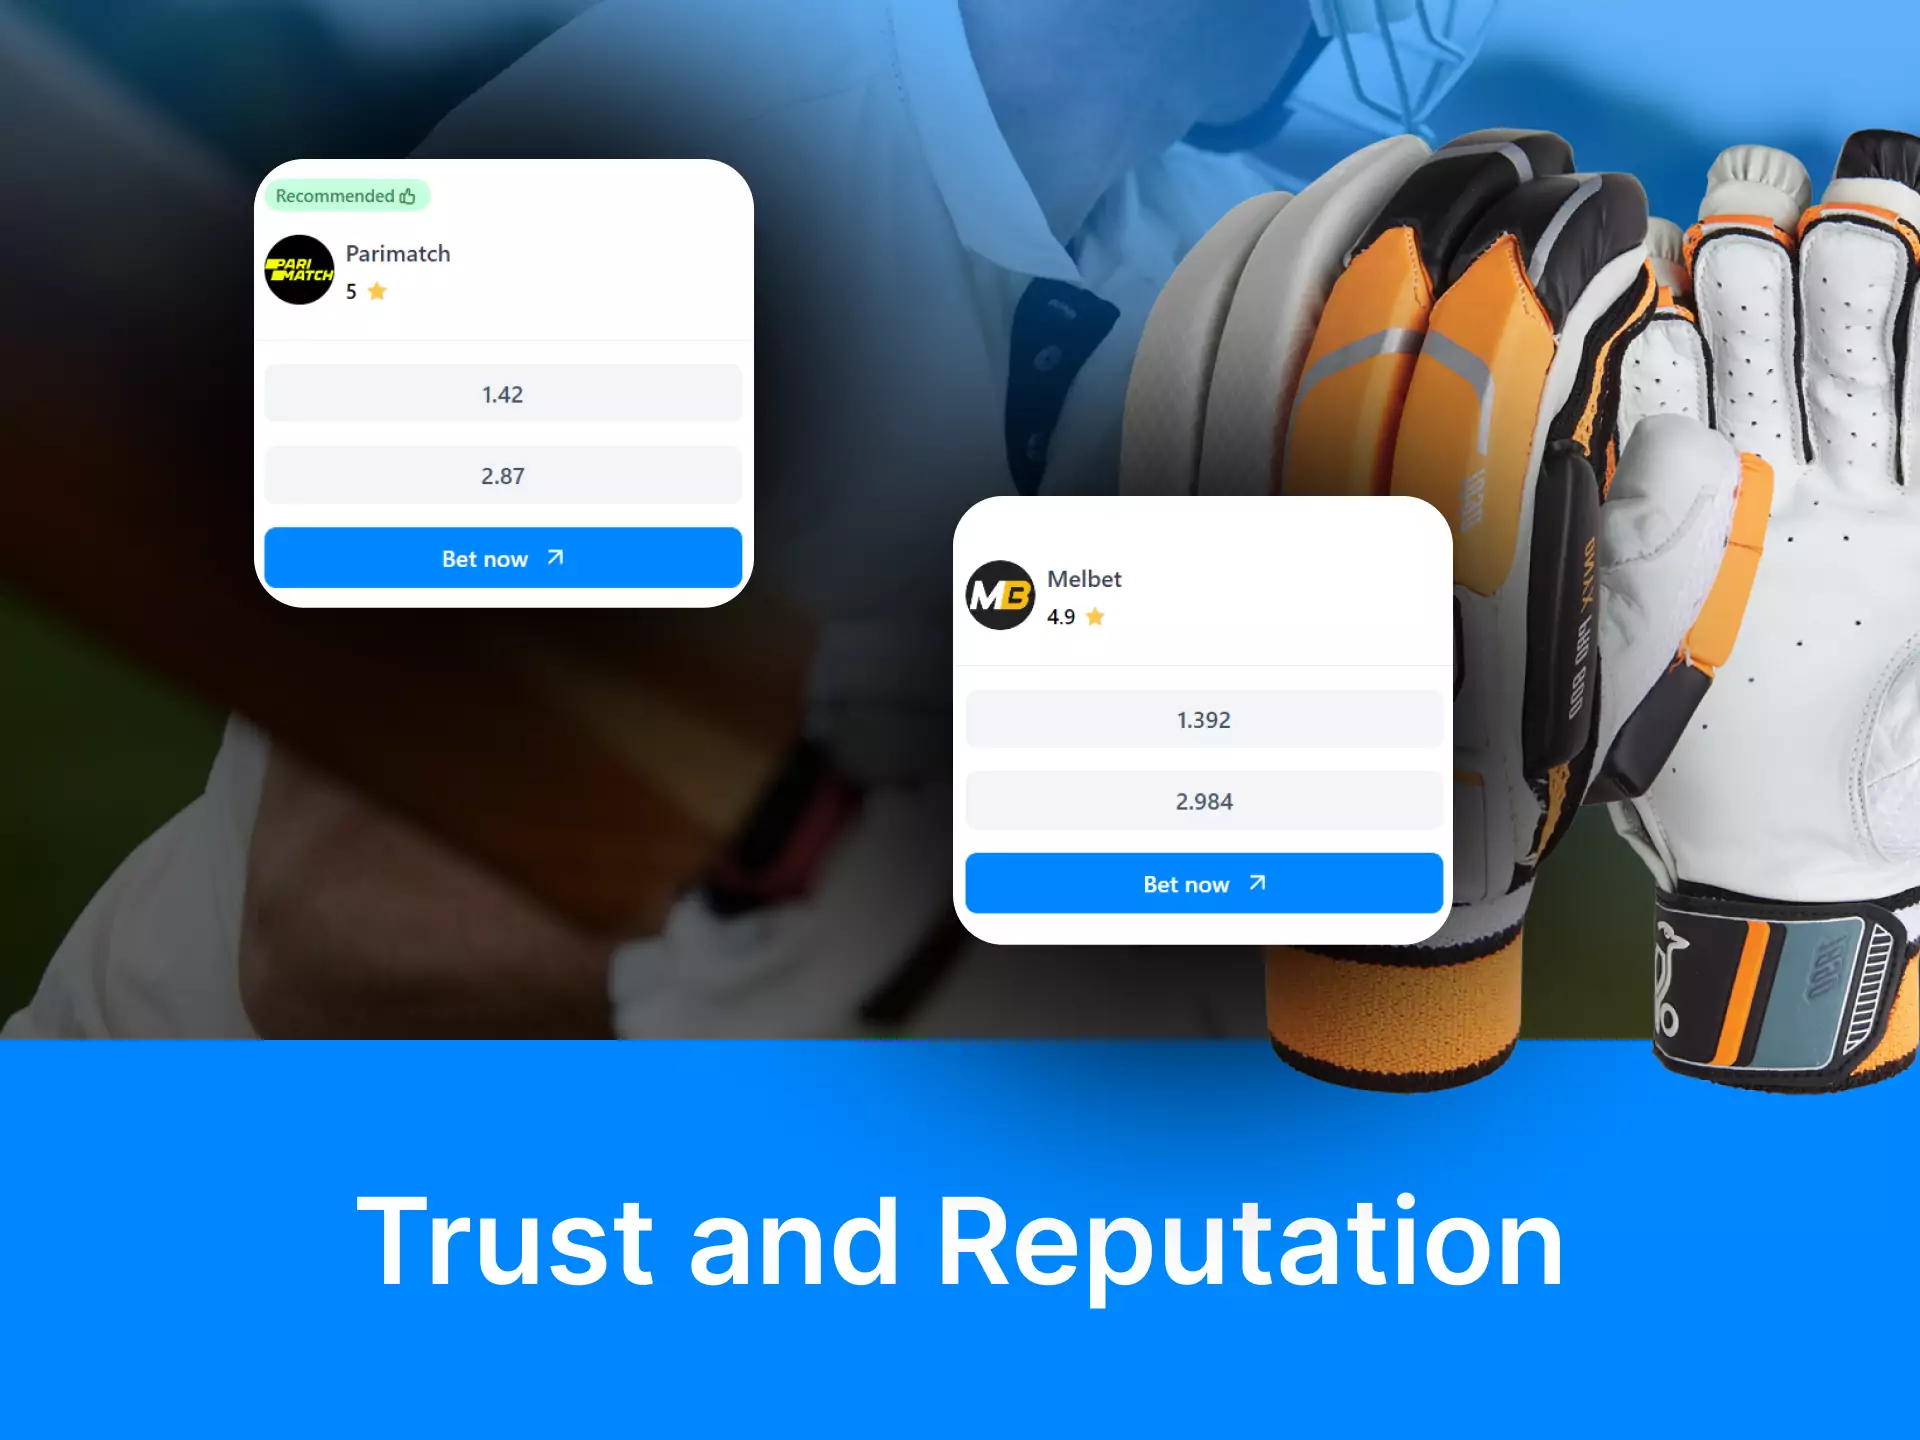 Choose a site for betting based on its trust and reputation.